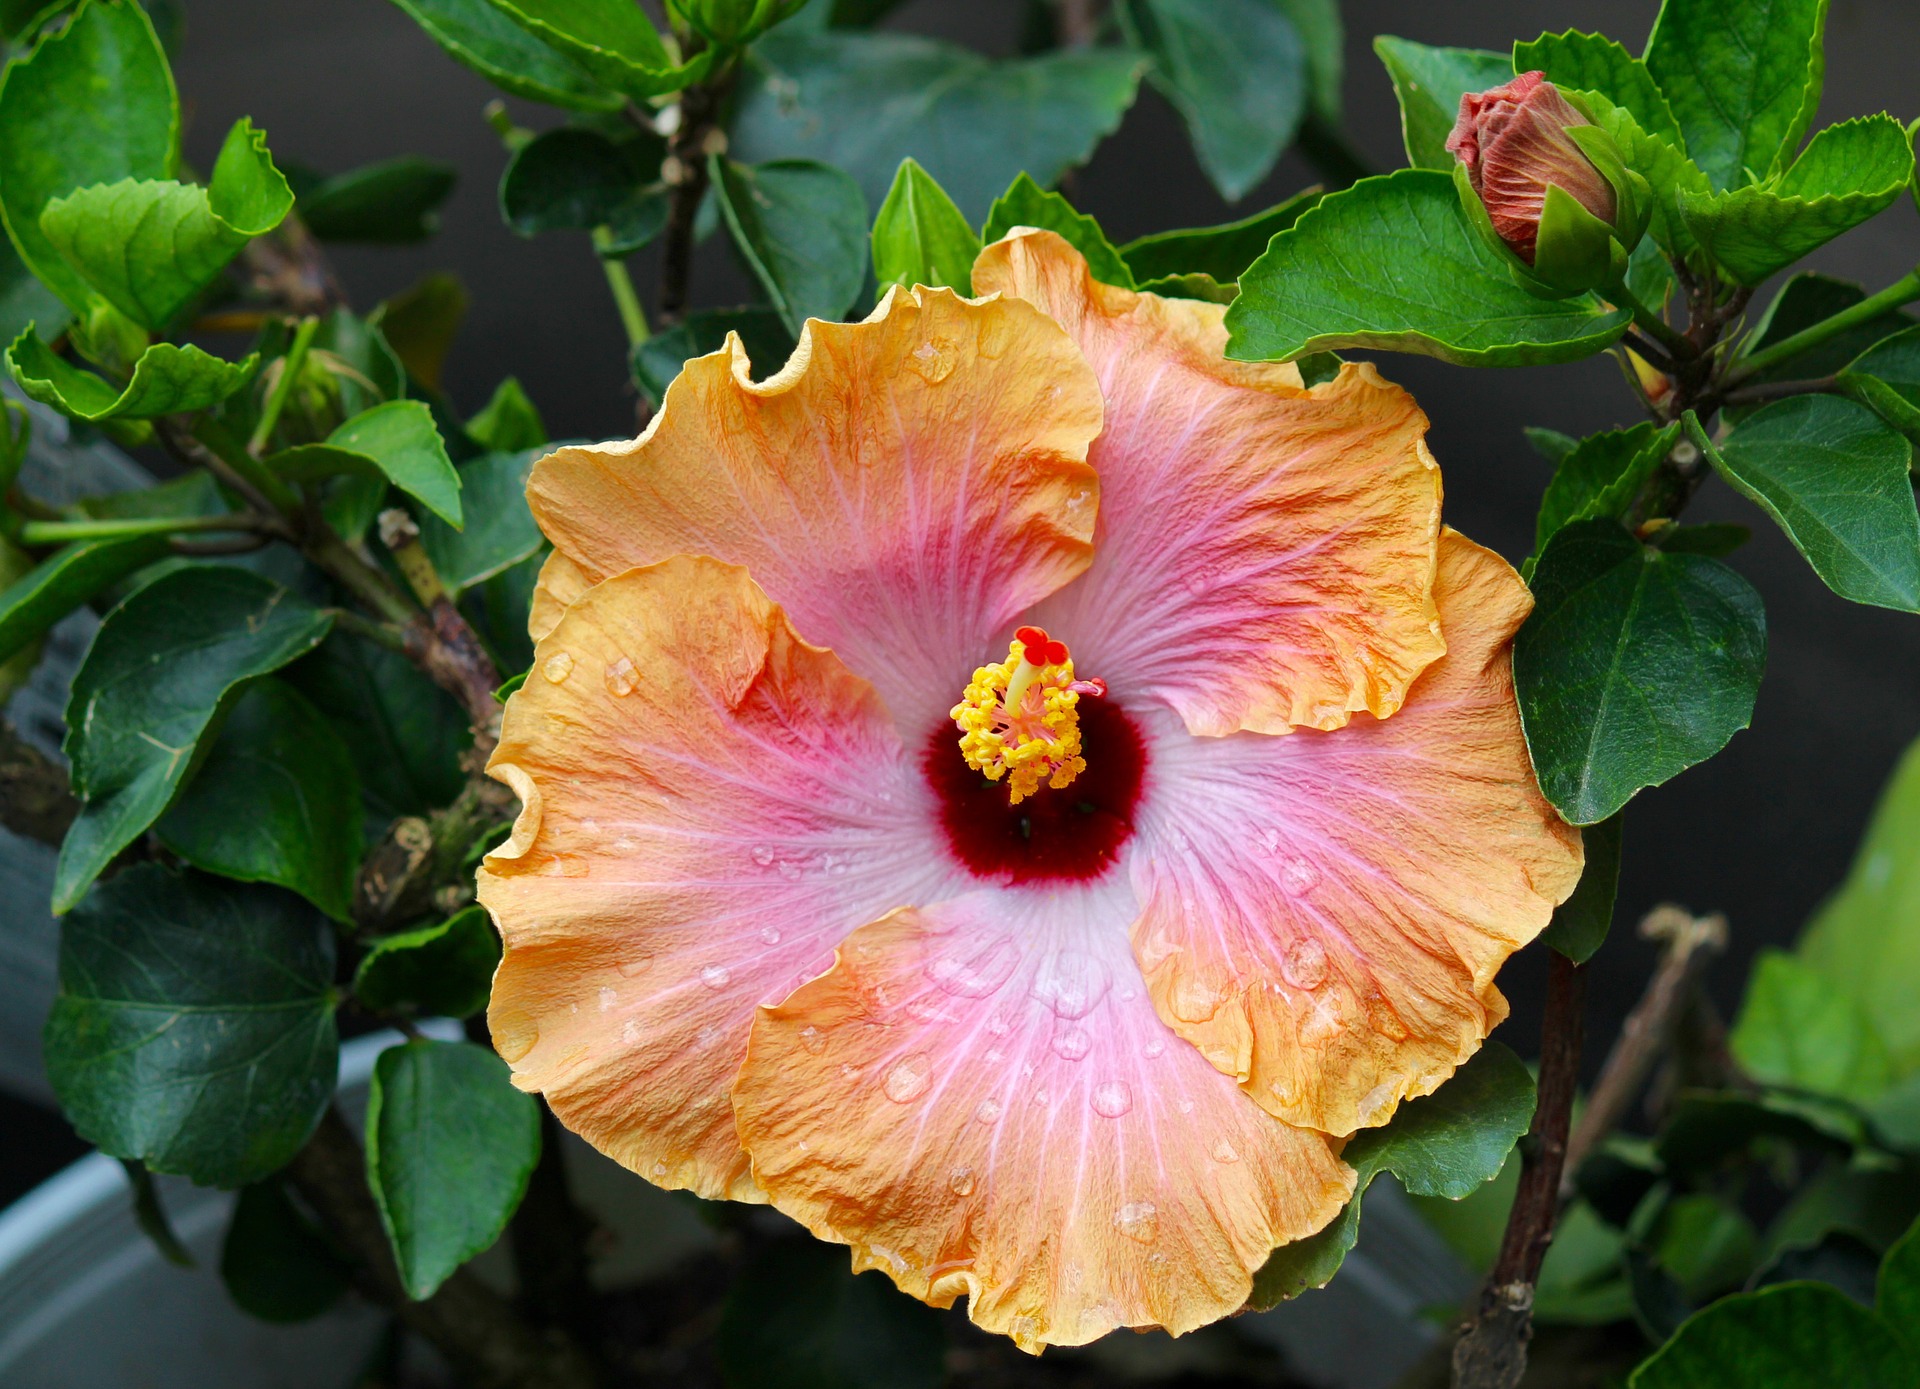 Hibiscus: How to Plant, Grow, and Care for Hibiscus Plants | The Old